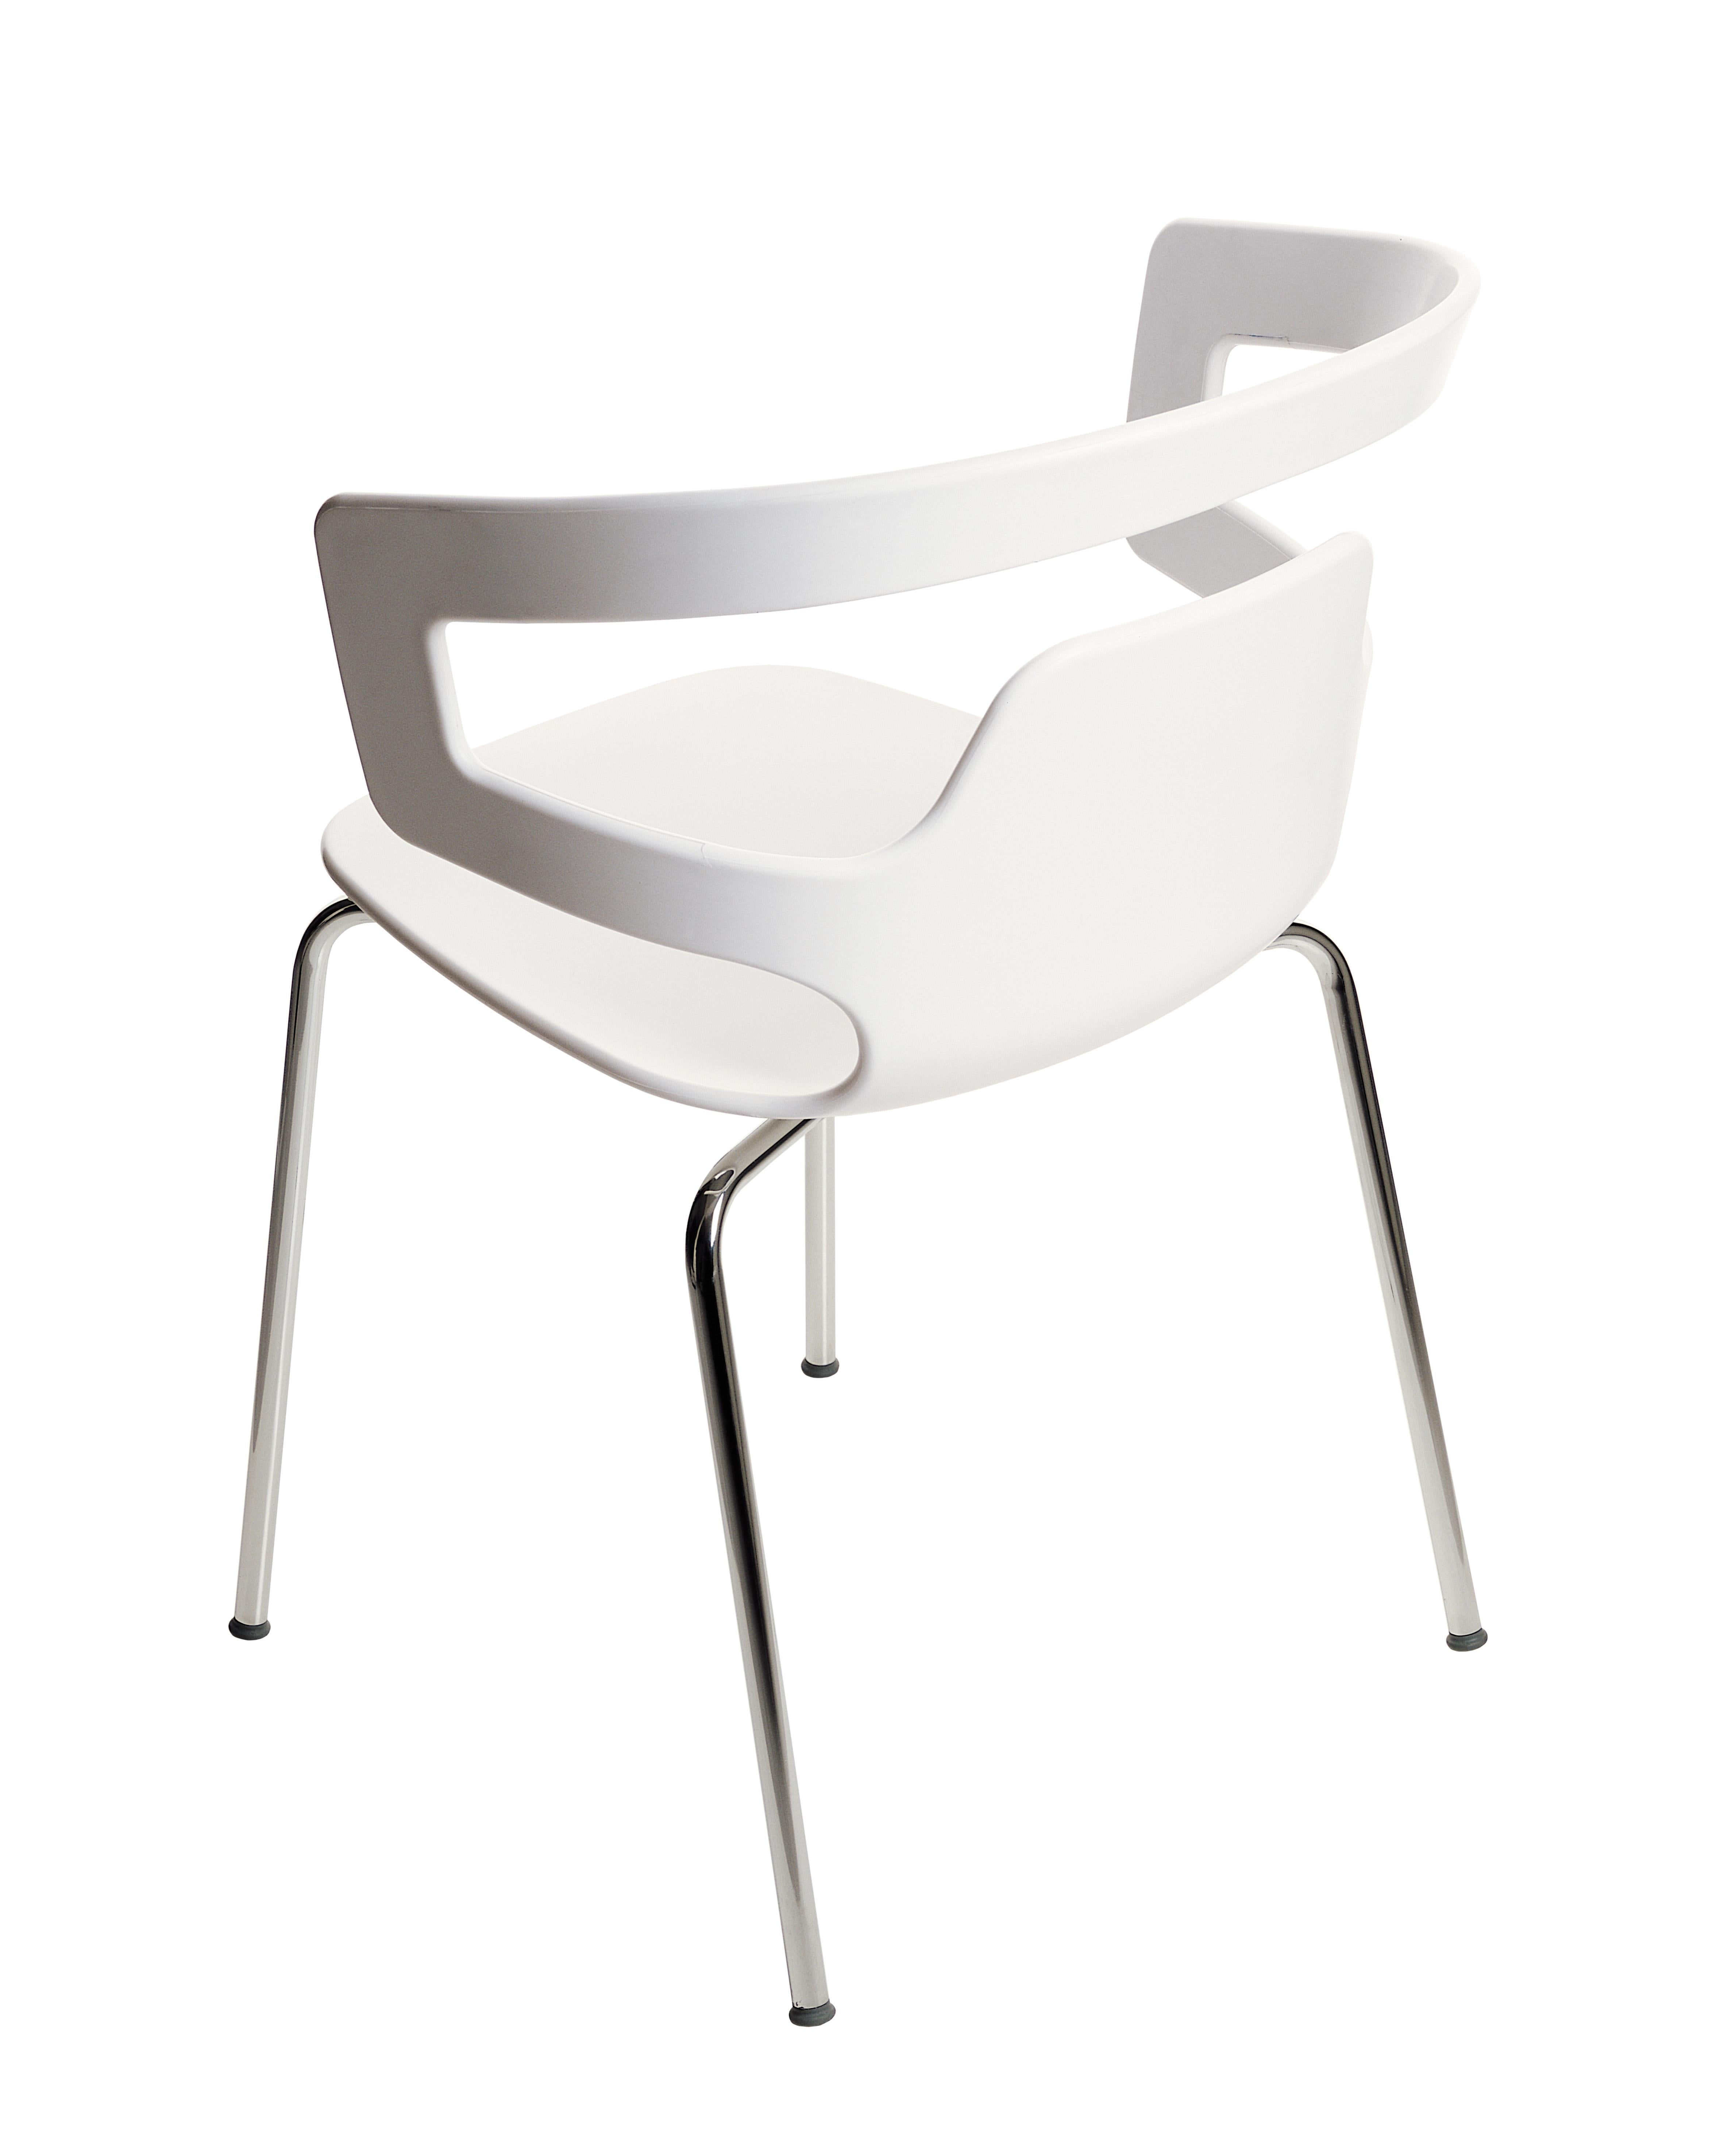 Italian Alias 500 Segesta Chair in White Seat and Chromed Steel Frame by Alfredo Häberli For Sale